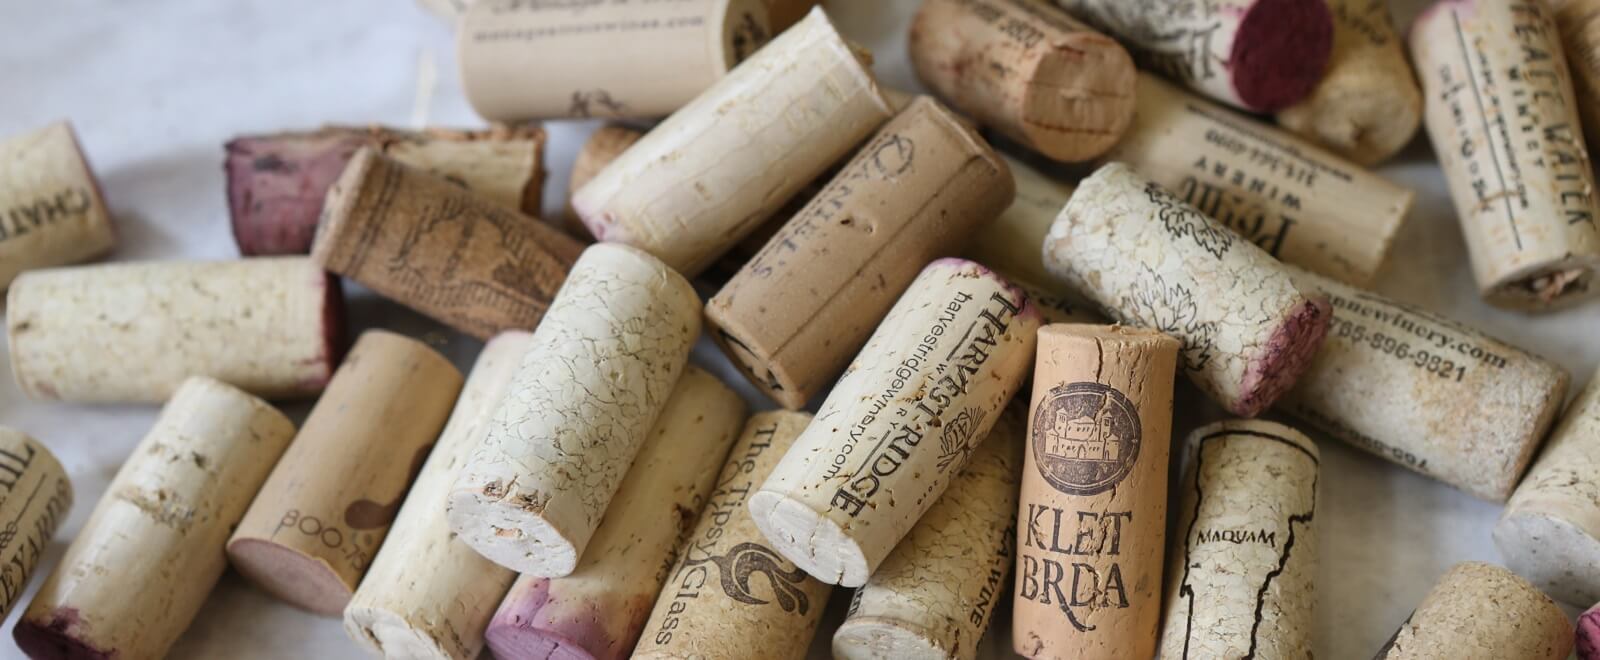 Small pile of corks from wine bottles